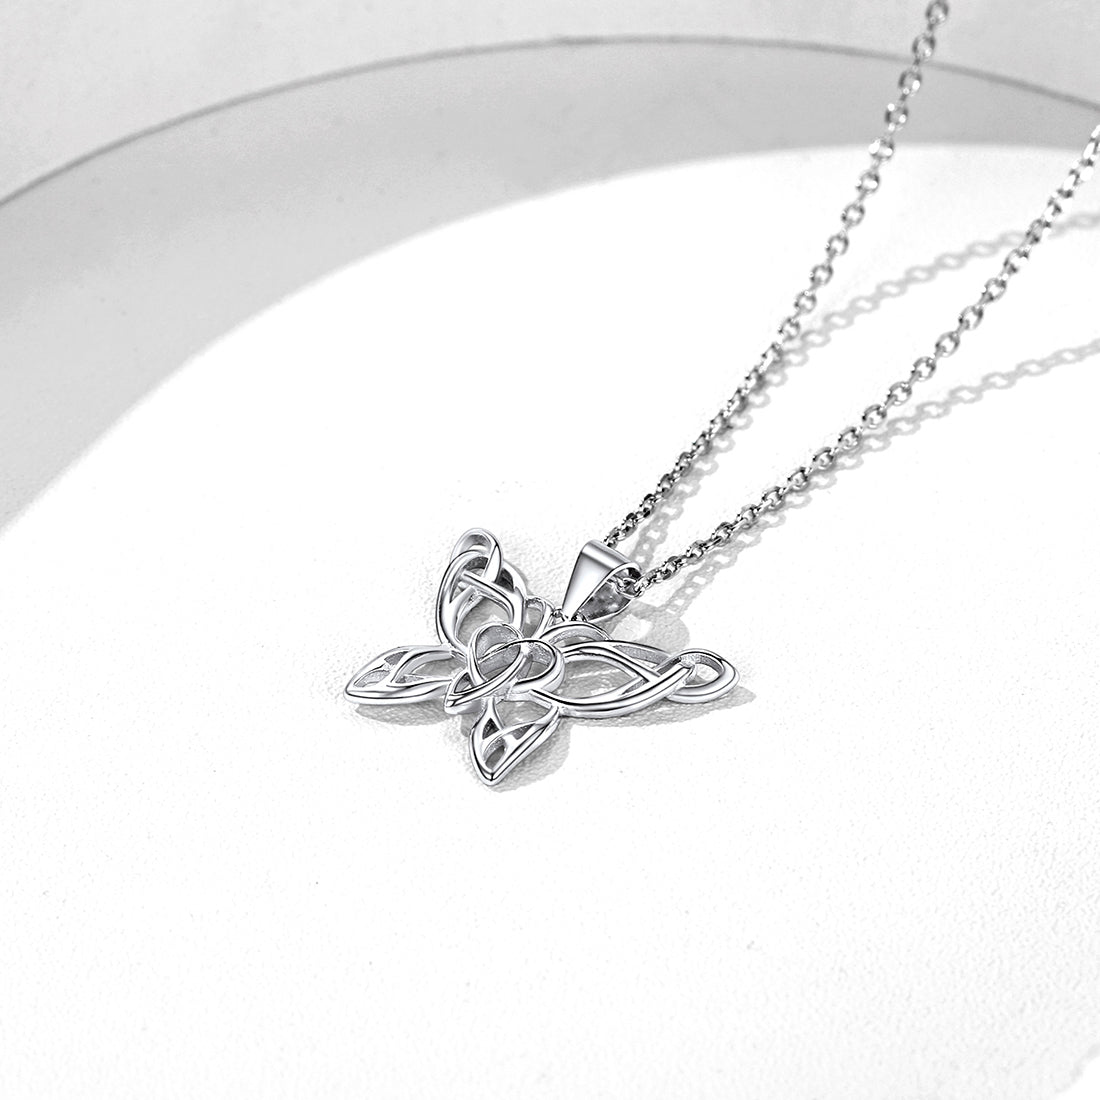 FaithHeart Celtic Knot Butterfly Pendant Necklace in Sterling Silver FaithHeart